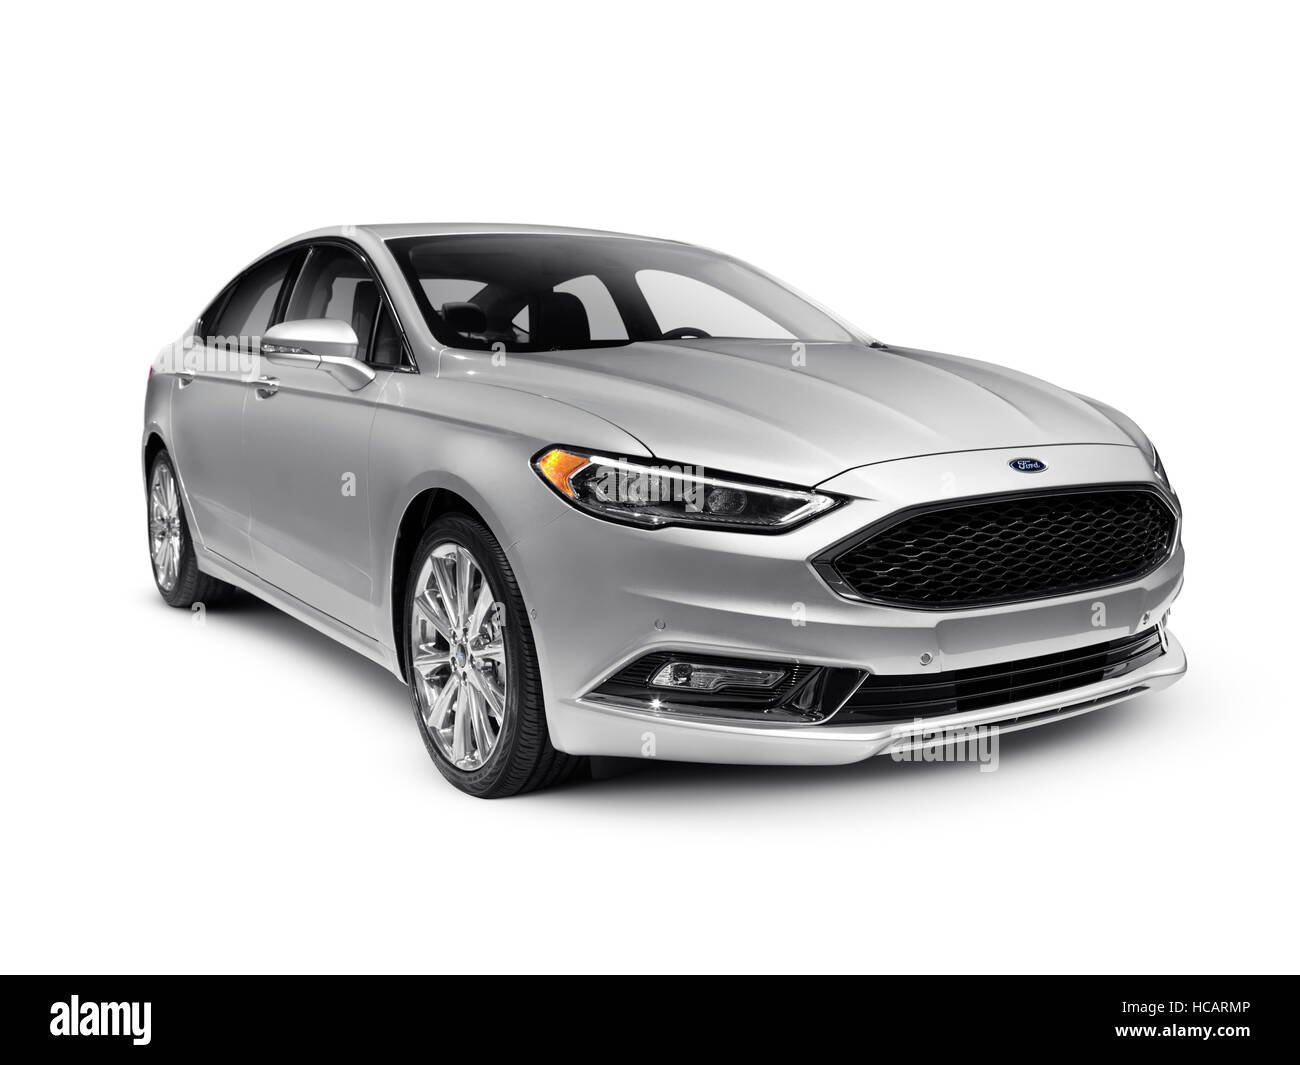 License and prints at MaximImages.com - Silver 2017 Ford Fusion mid-size sedan car isolated on white background with clipping path Stock Photo